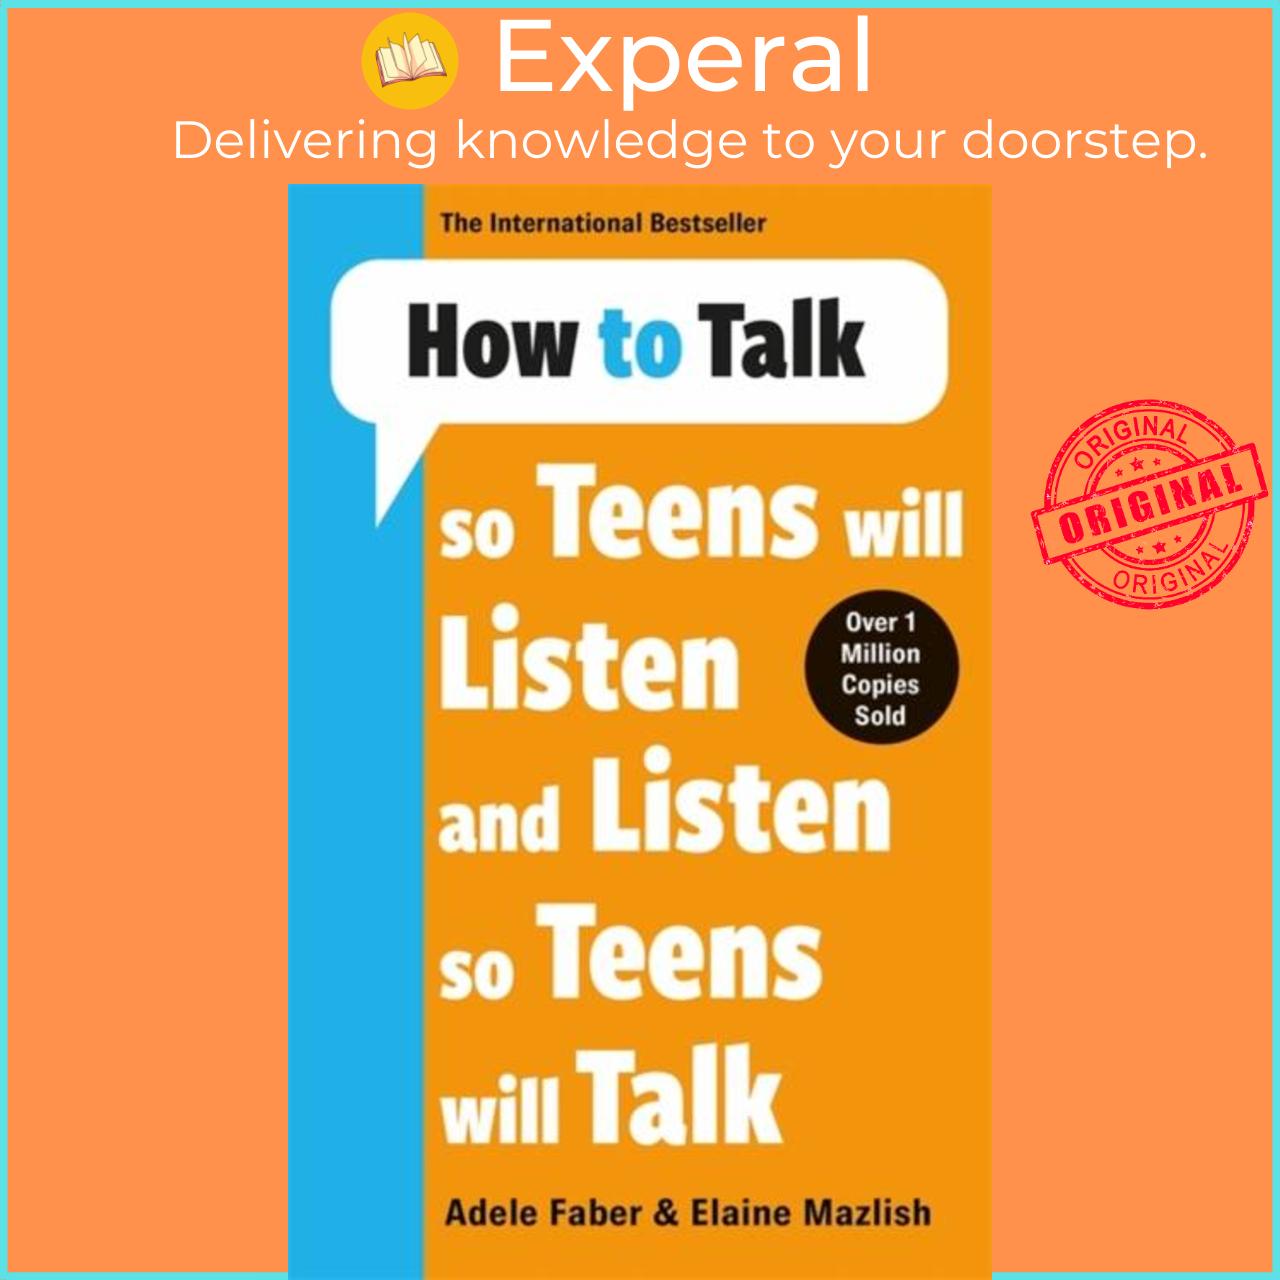 Sách - How to Talk so Teens will Listen & Listen so Teens will by Adele & Elaine Faber & Mazlish (UK edition, paperback)